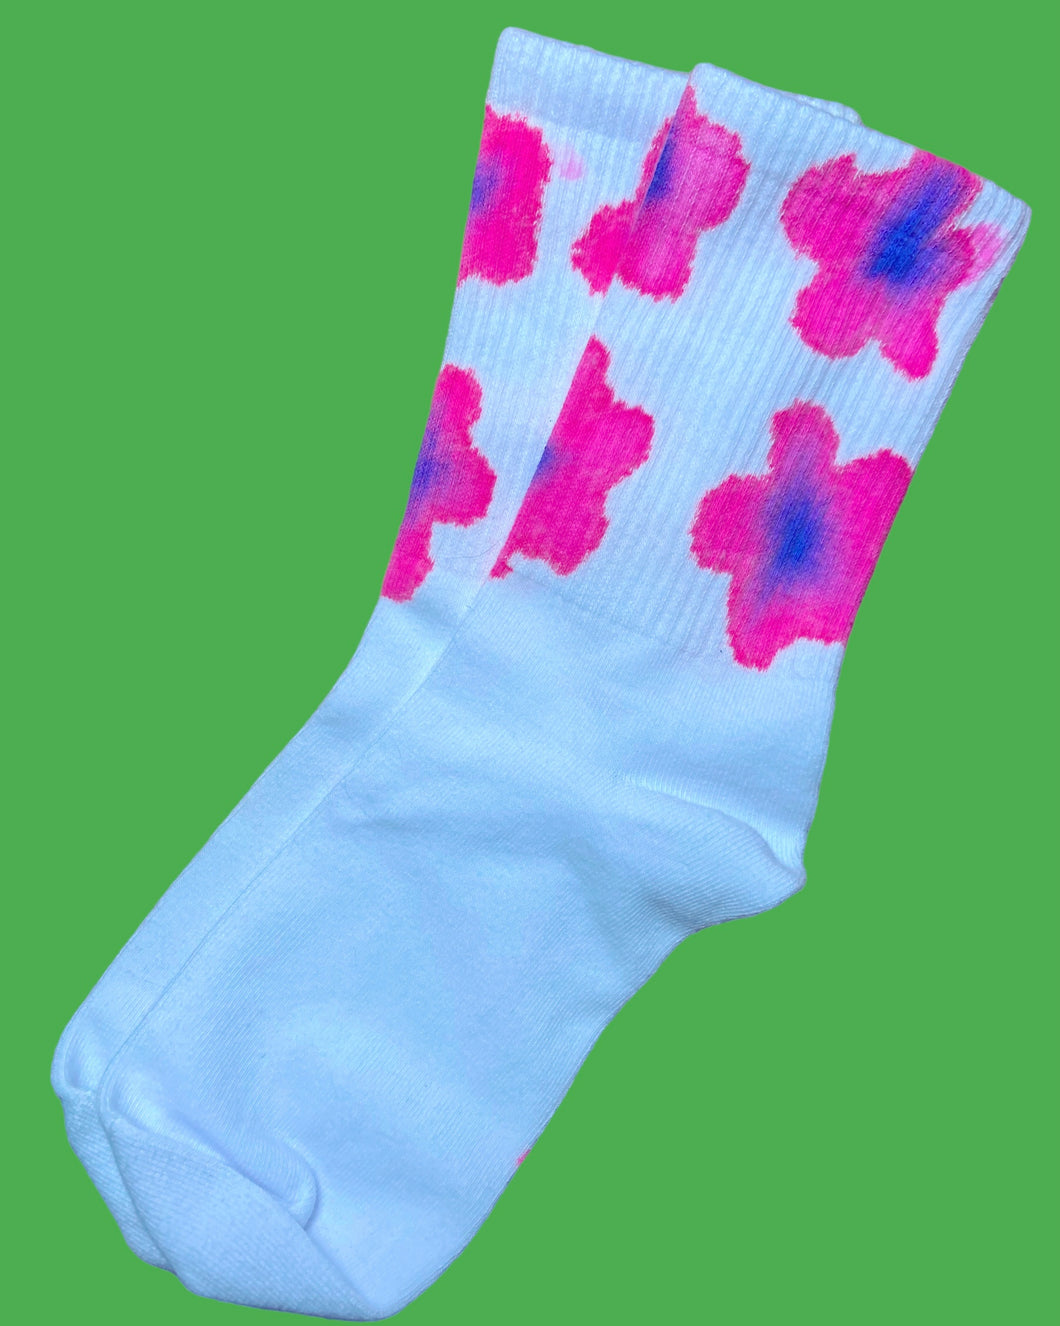 Hand painted pink floral socks